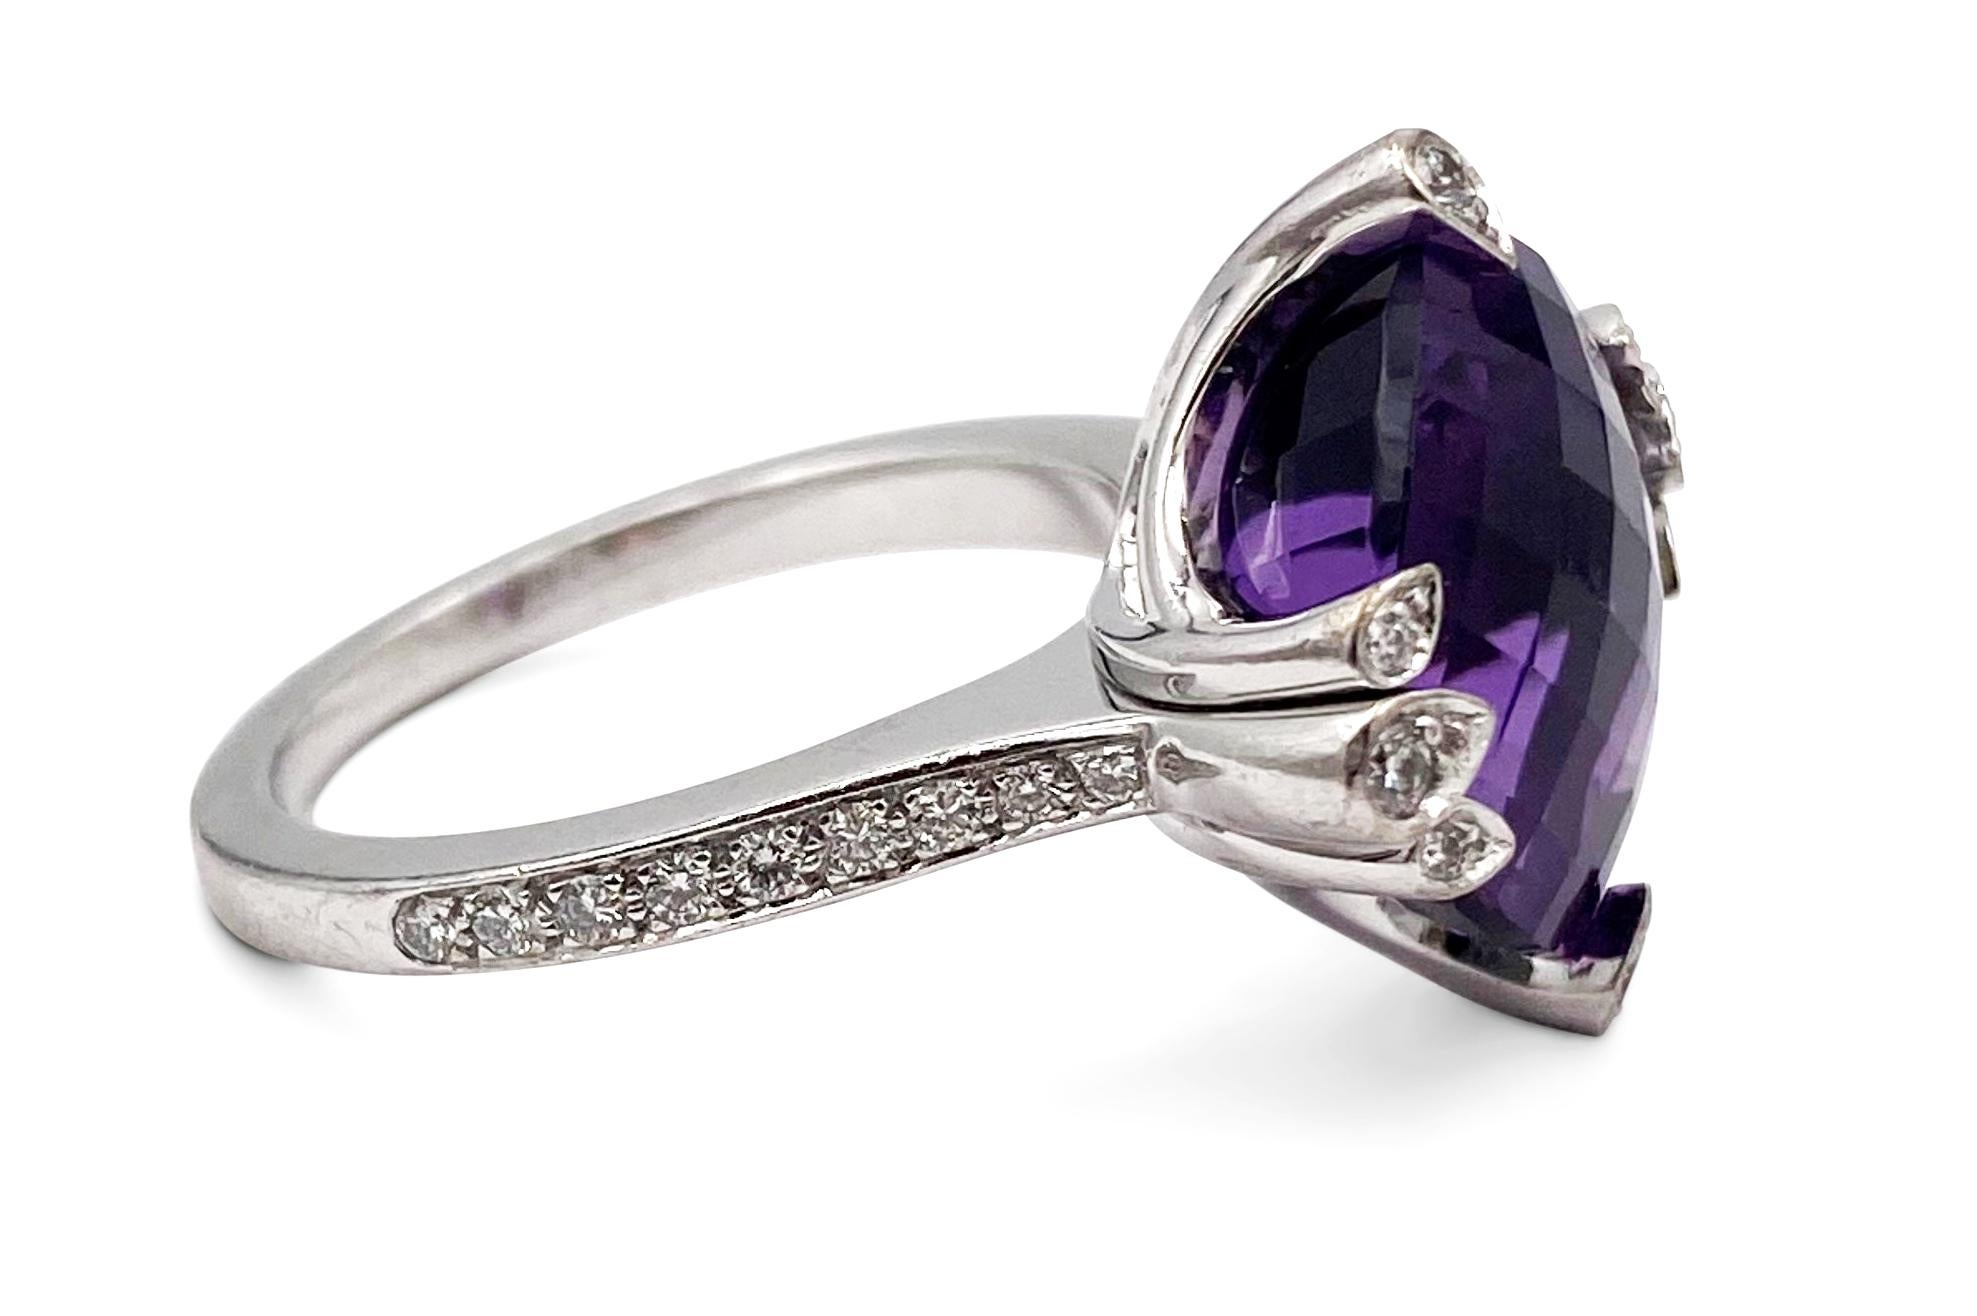 Authentic Cartier Lotus ring made in 18 karat white gold with approximately 26 round cut diamonds and a faceted amethyst center.  Size 51, CIRCA 2009.  Stamped Cartier, 750, 51.  Ring is accompanied by original Cartier box and receipt